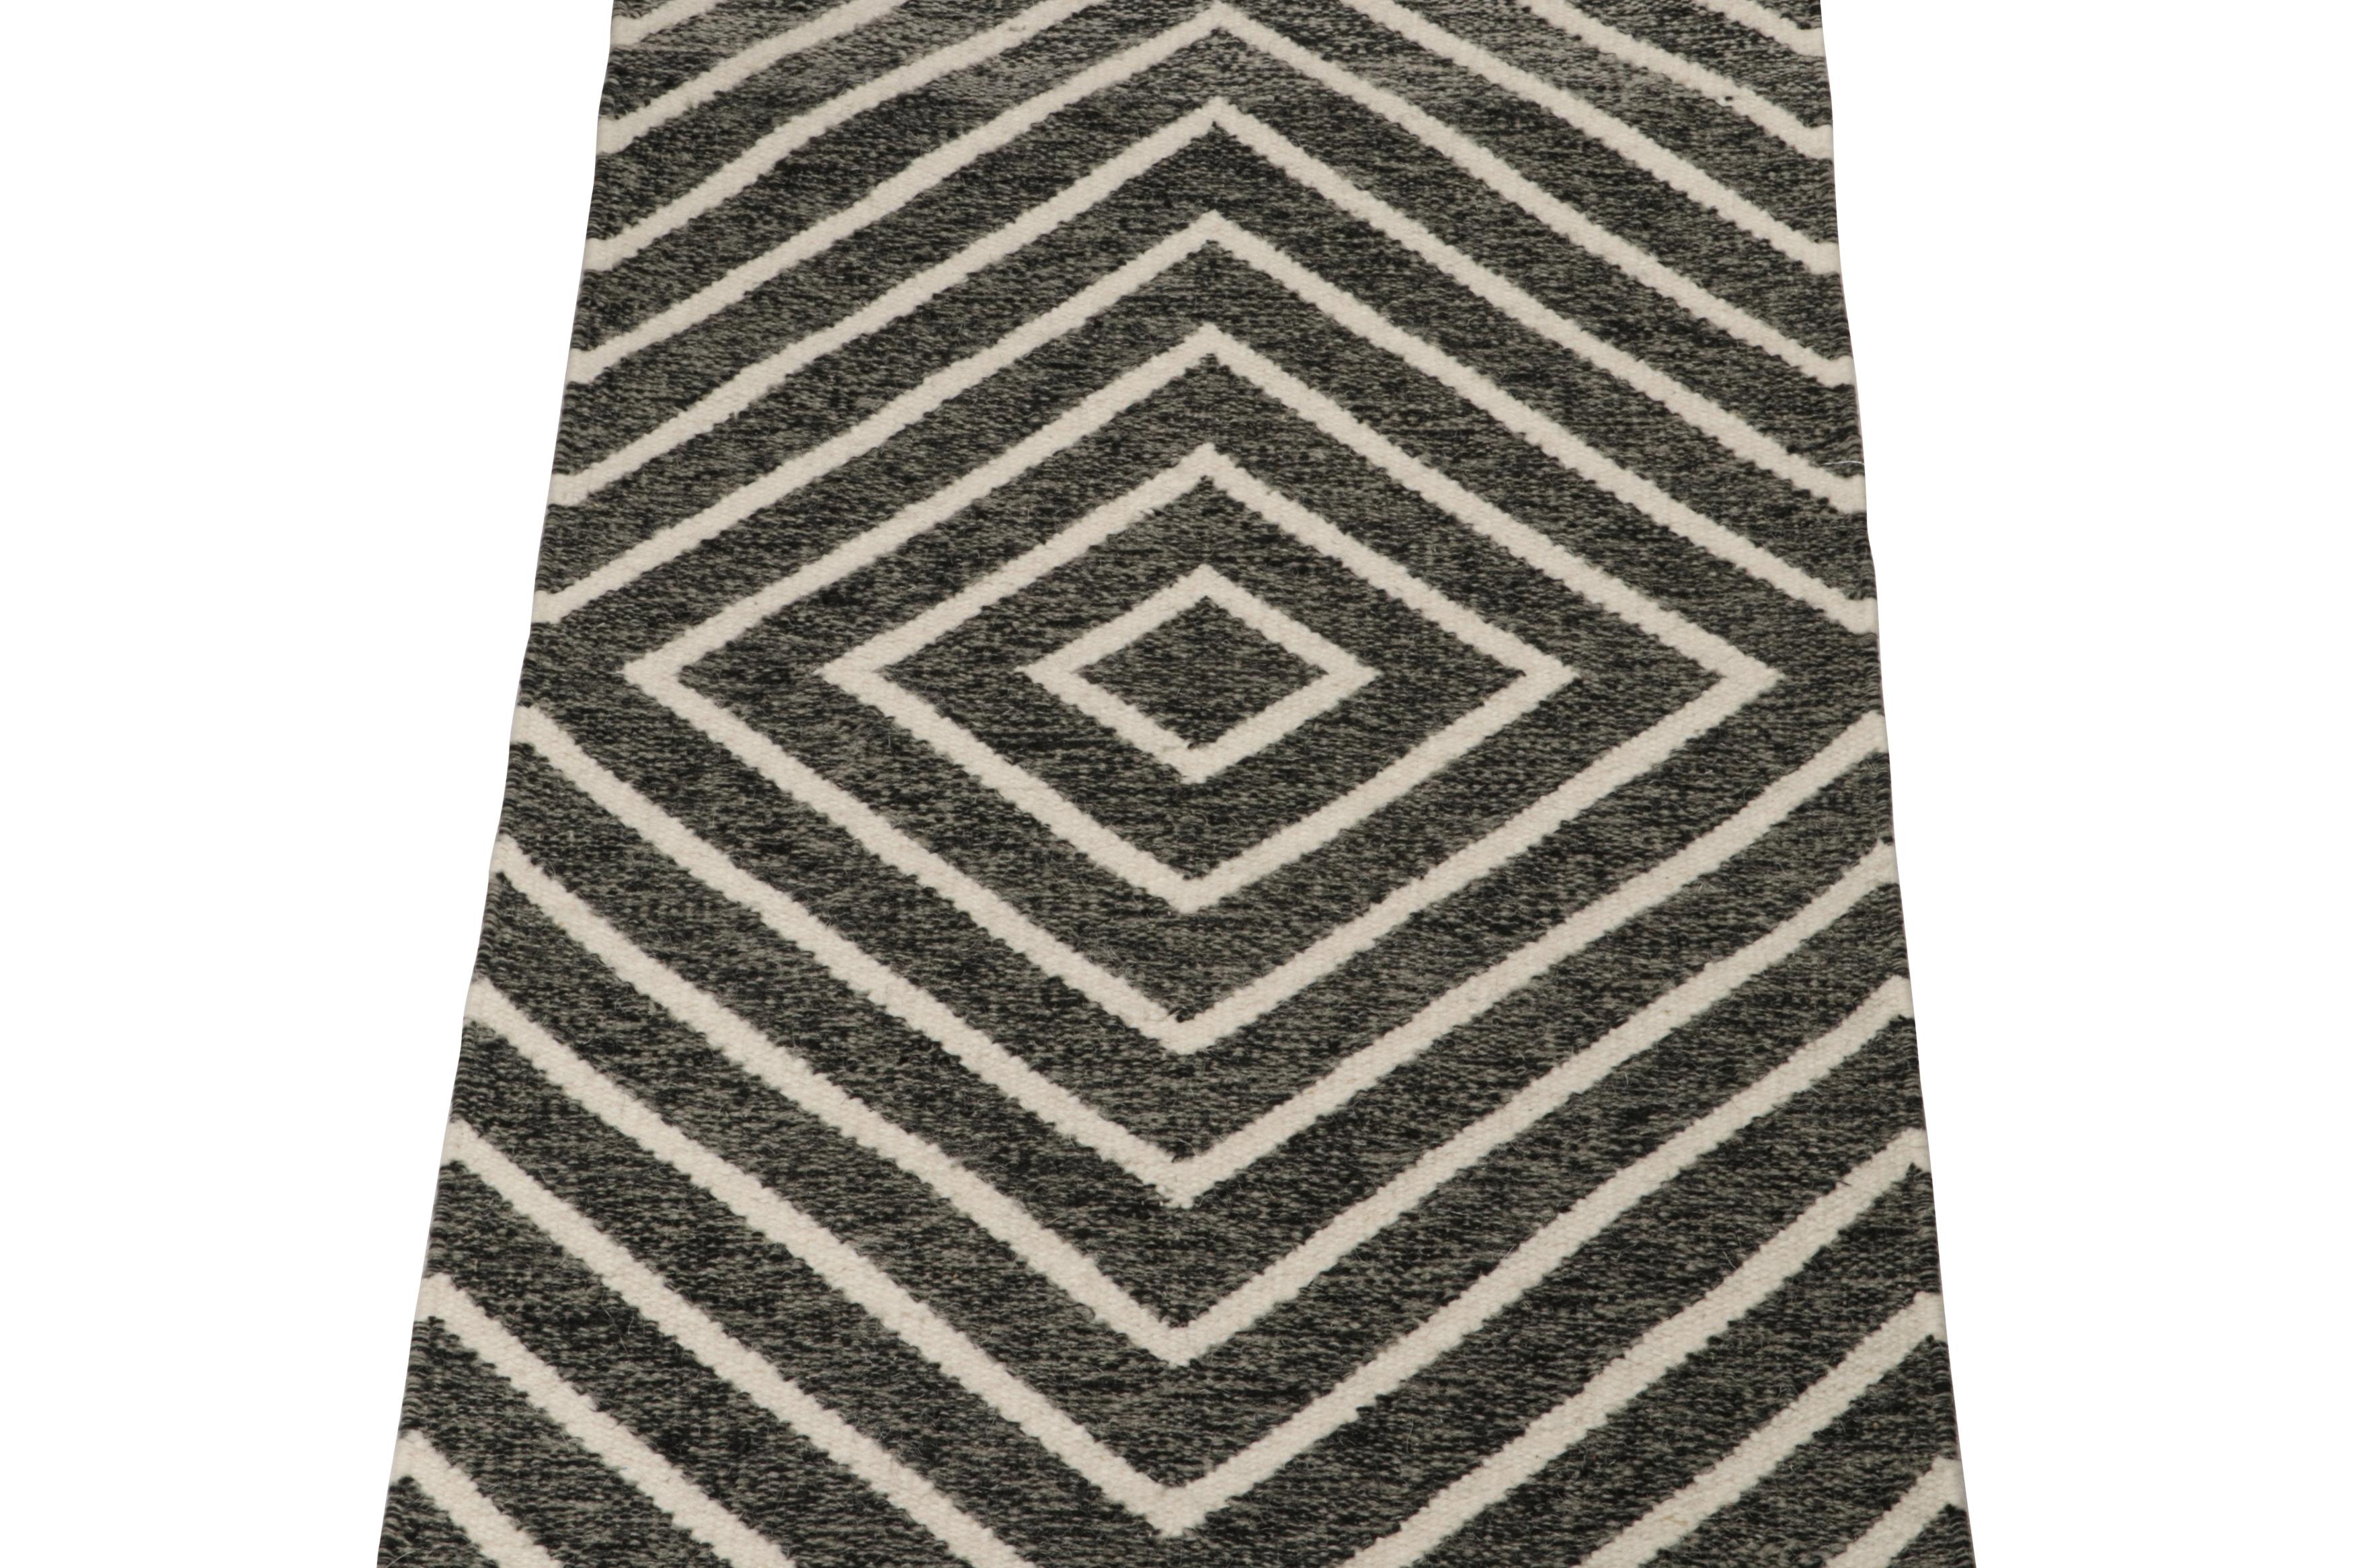 Indian Rug & Kilim’s Modern Kilim Accent Rug in Gray with White Diamond Patterns For Sale